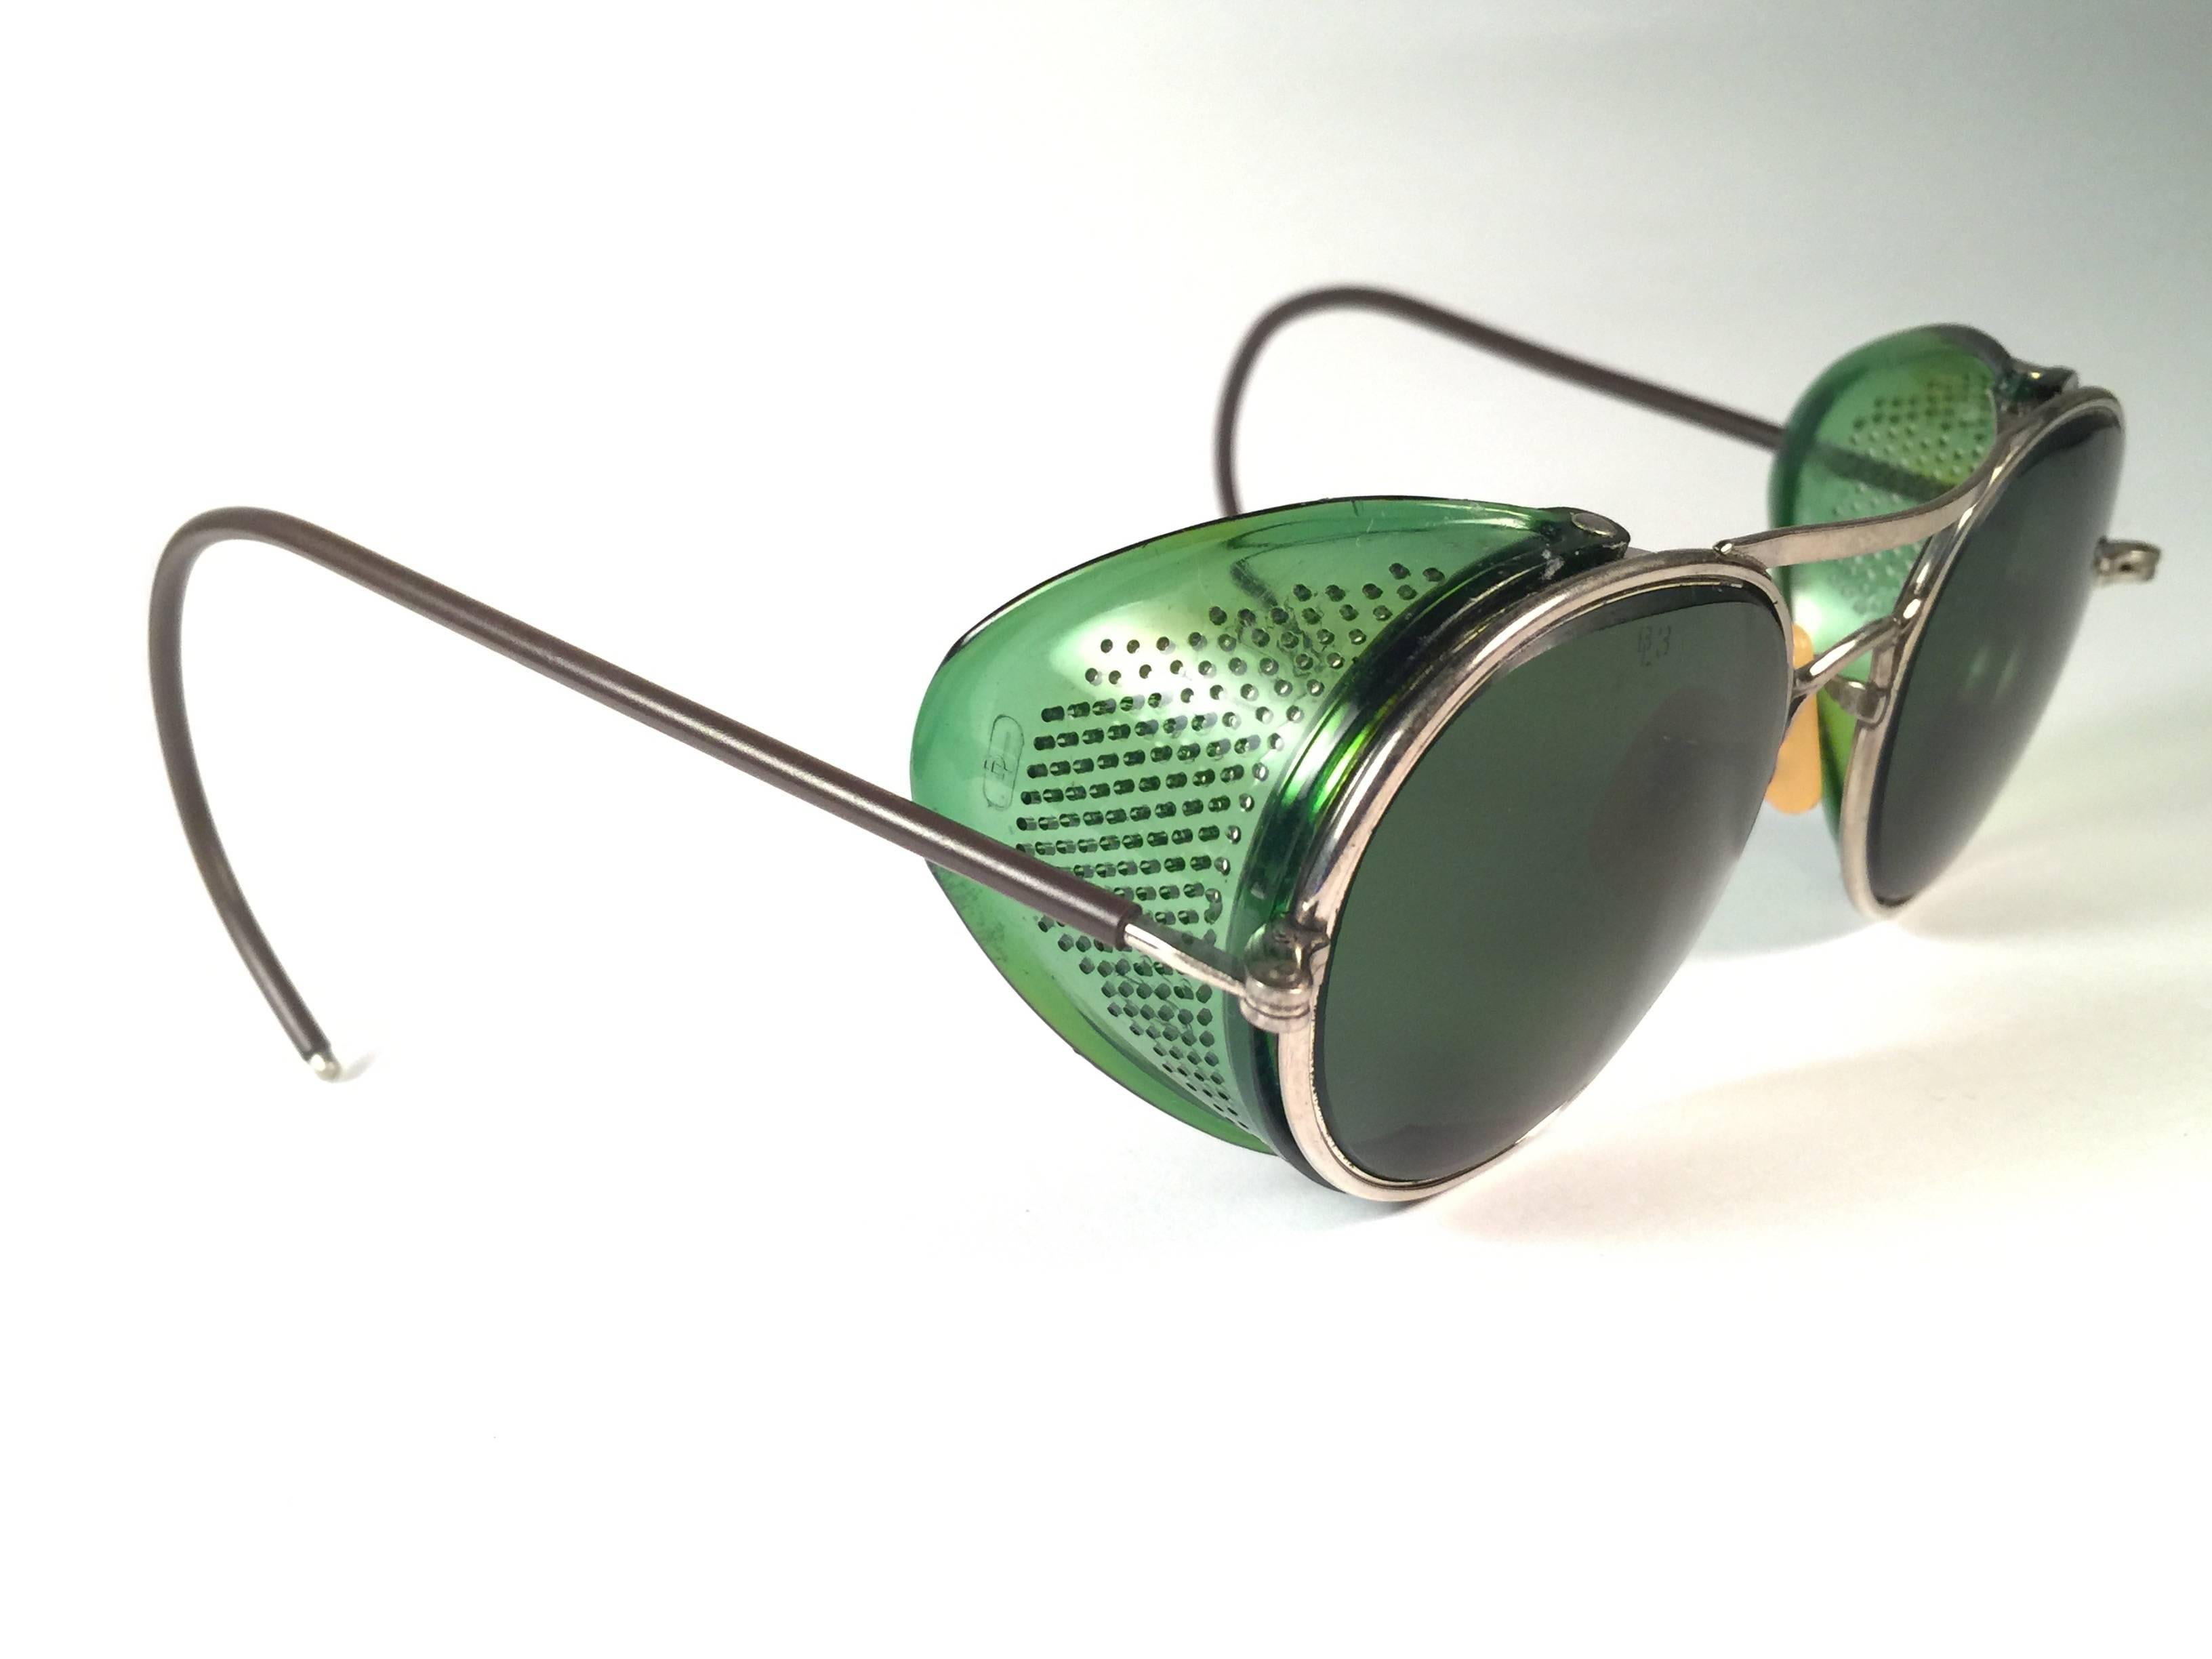 Superb Item! 1950's Bausch & Lomb Safety Goggles.  
Folding green and silver metal side cups and special wrapped temples.  Mint true green round lenses with light wear on them. 
Please note that this item is nearly 70 years old and has some ageing